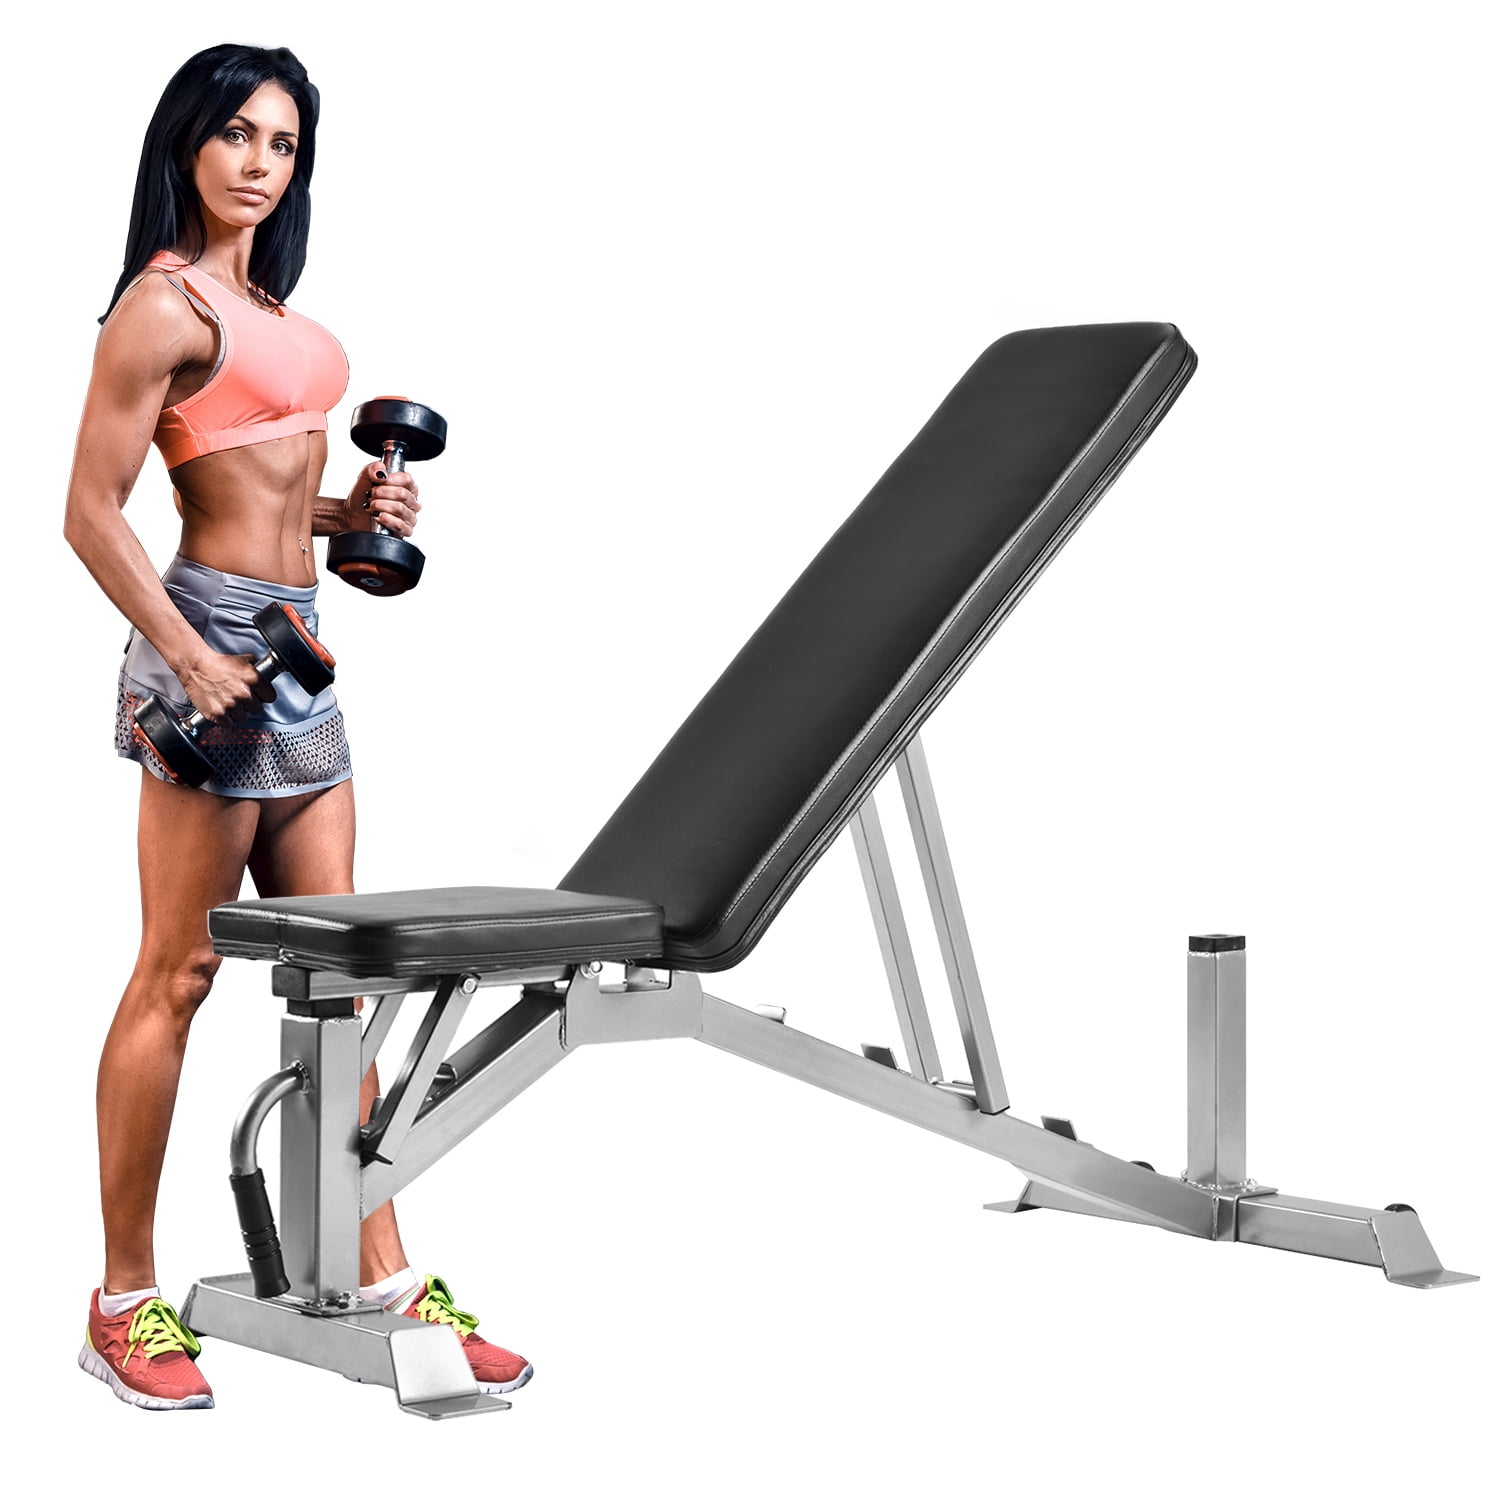 Utility Weight Bench for Full Body Workout Weight Bench Adjustable Workout Exercise Equipment for Home Gym Incline Extension AB Bench for Strength Training Equipment 